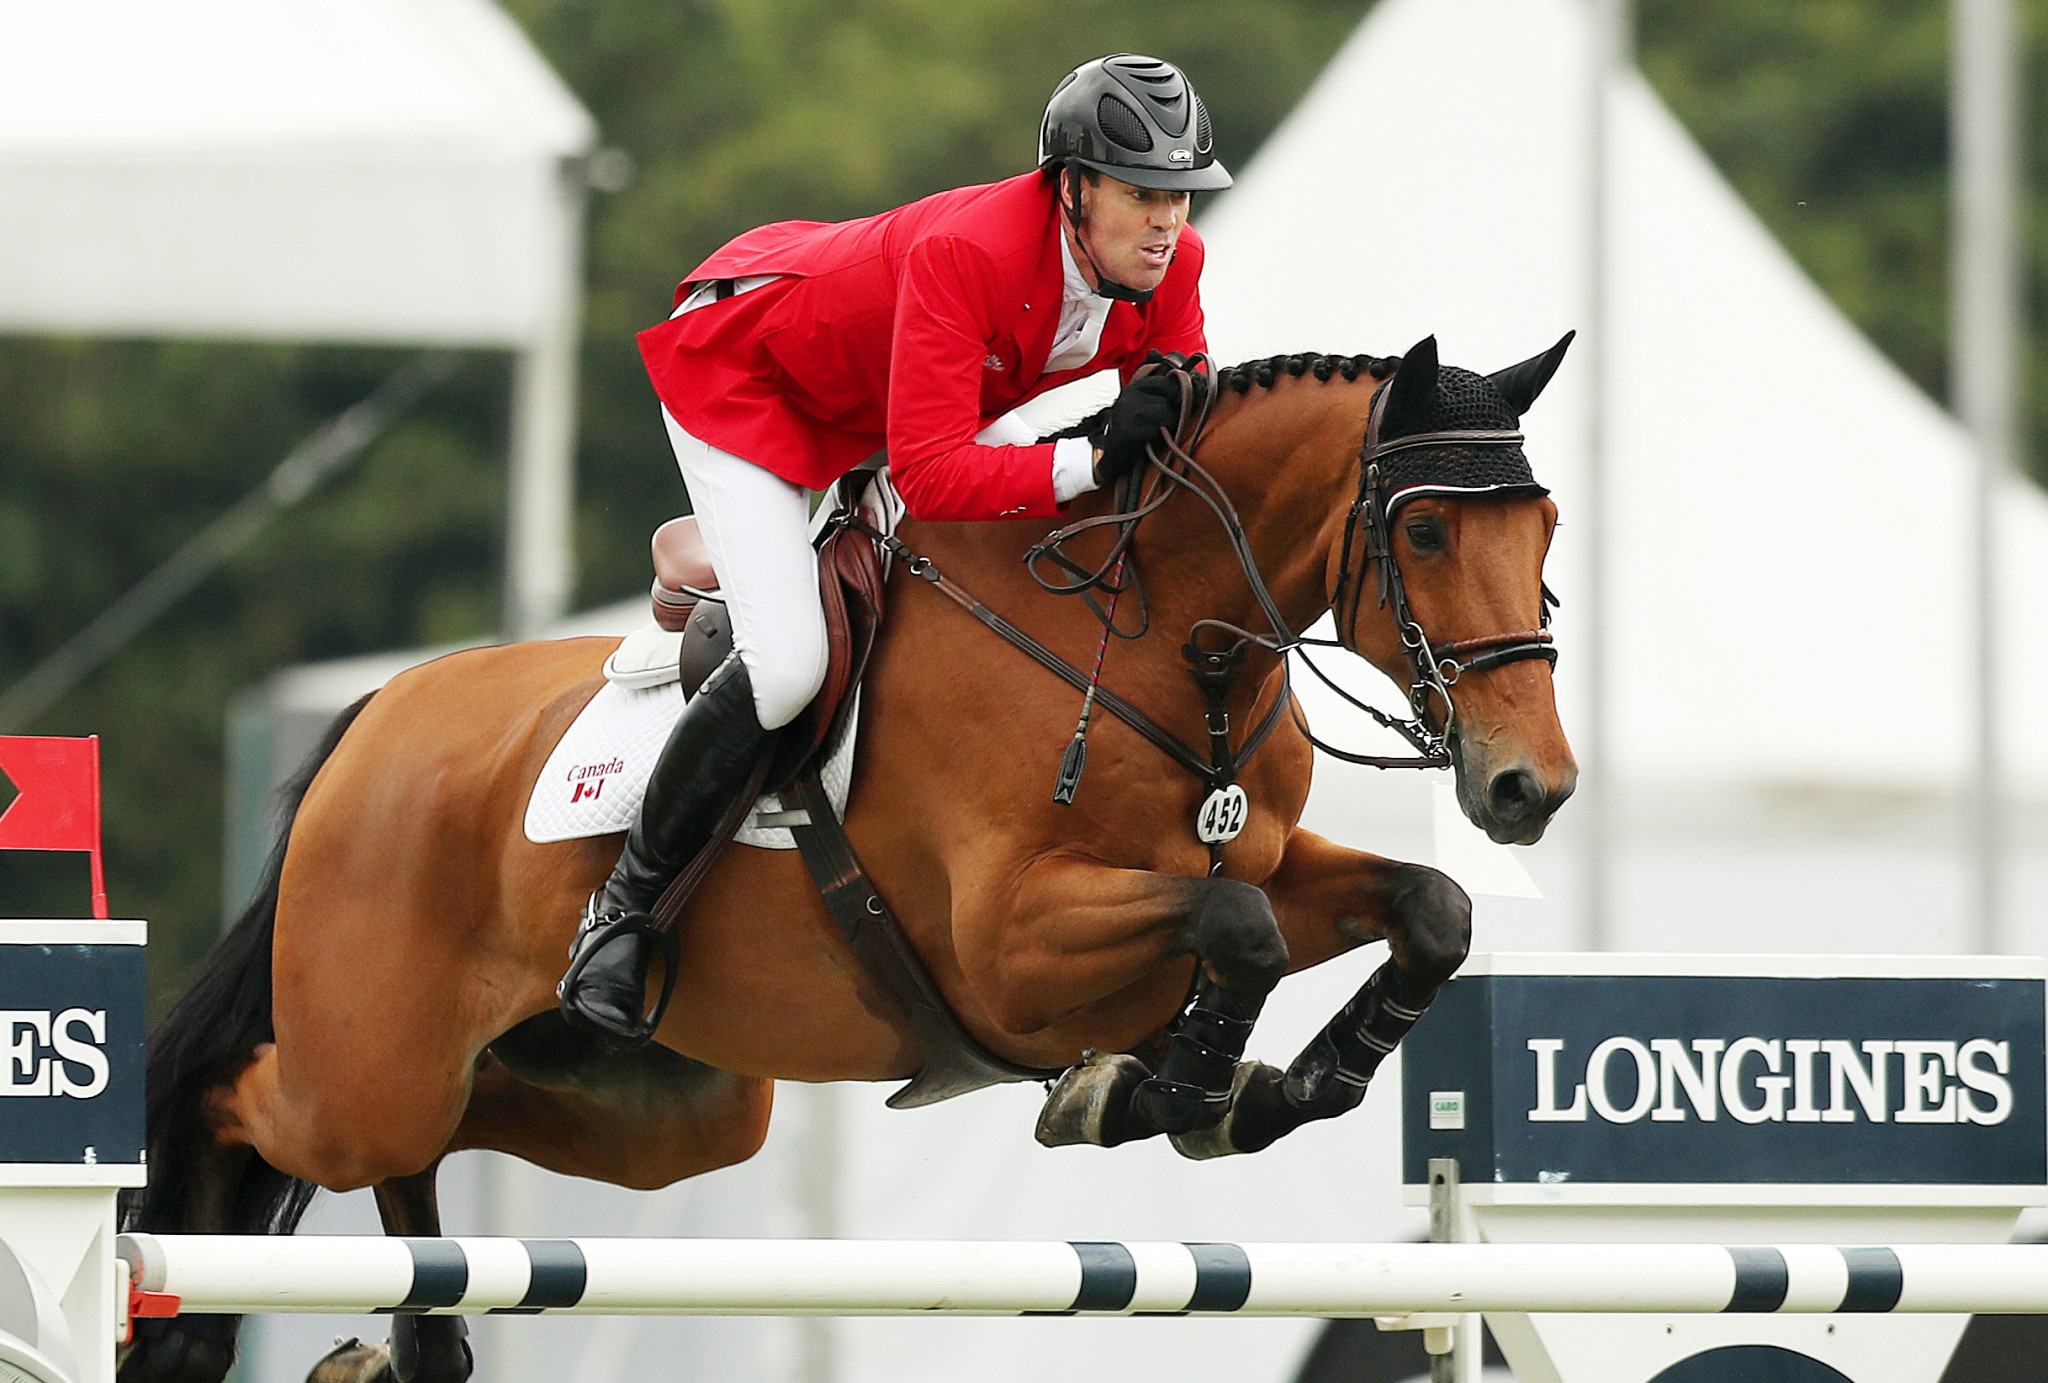 Jonathon Millar led Canada to gold at the FEI Jumping Nations Cup of Mexico ©FEI